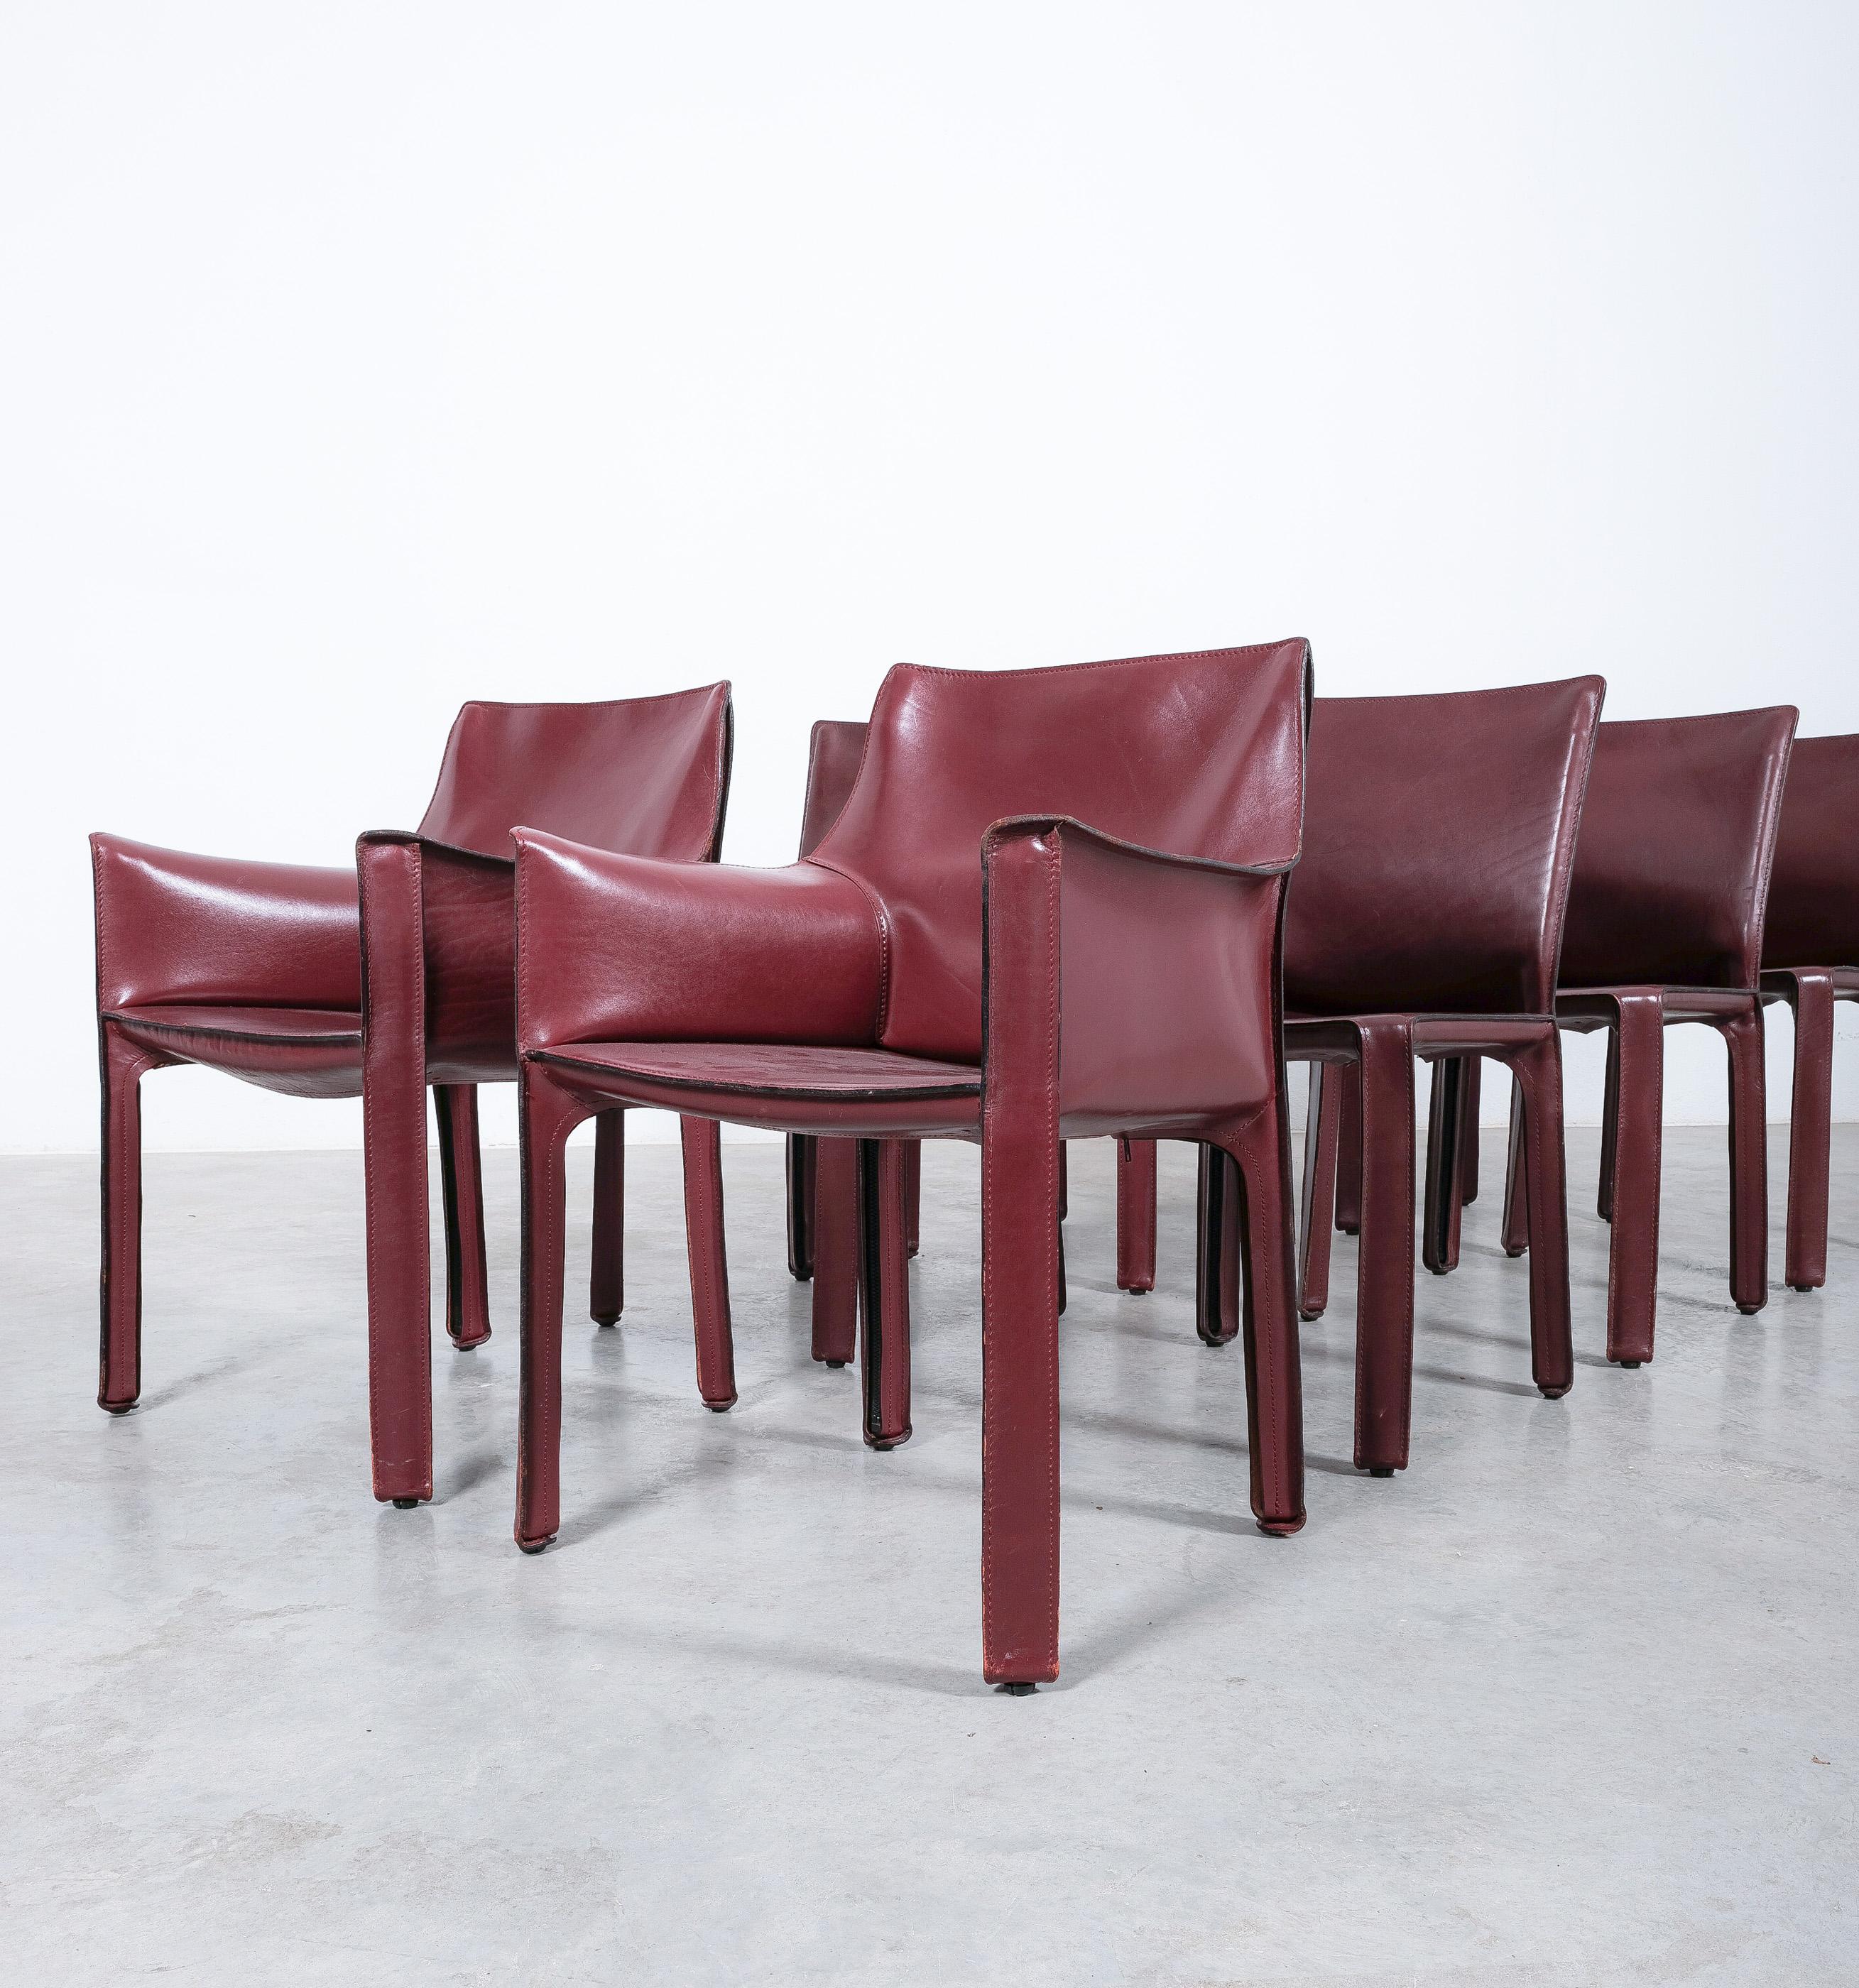 Late 20th Century Mario Bellini Cassina Cab 412, 413 Set of Ten 9 Red Leather Dining Chairs